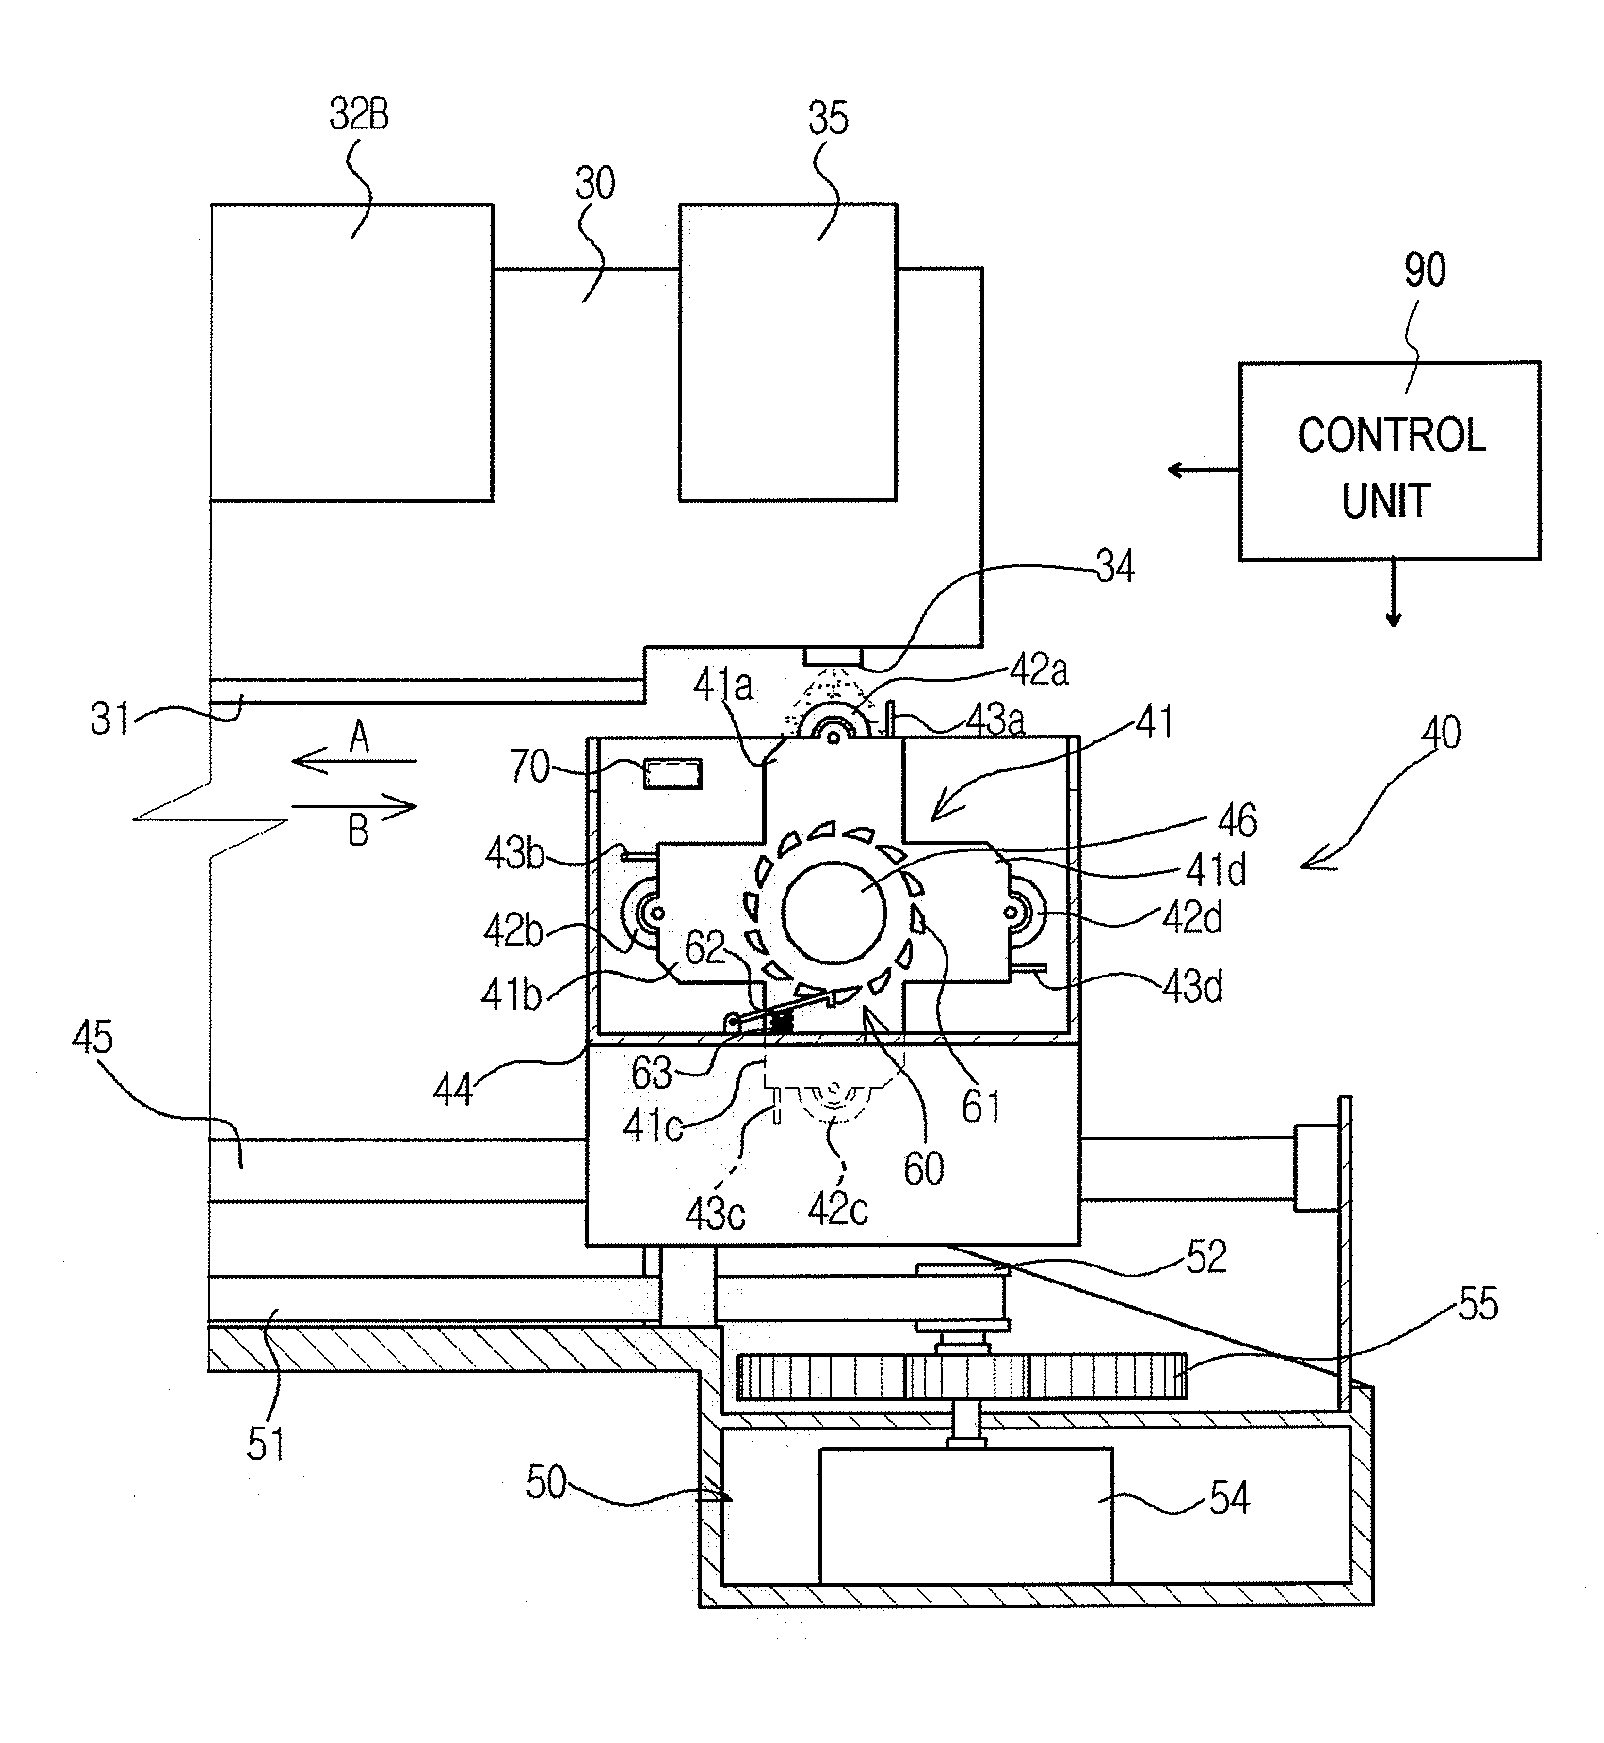 Ink-jet image forming apparatus